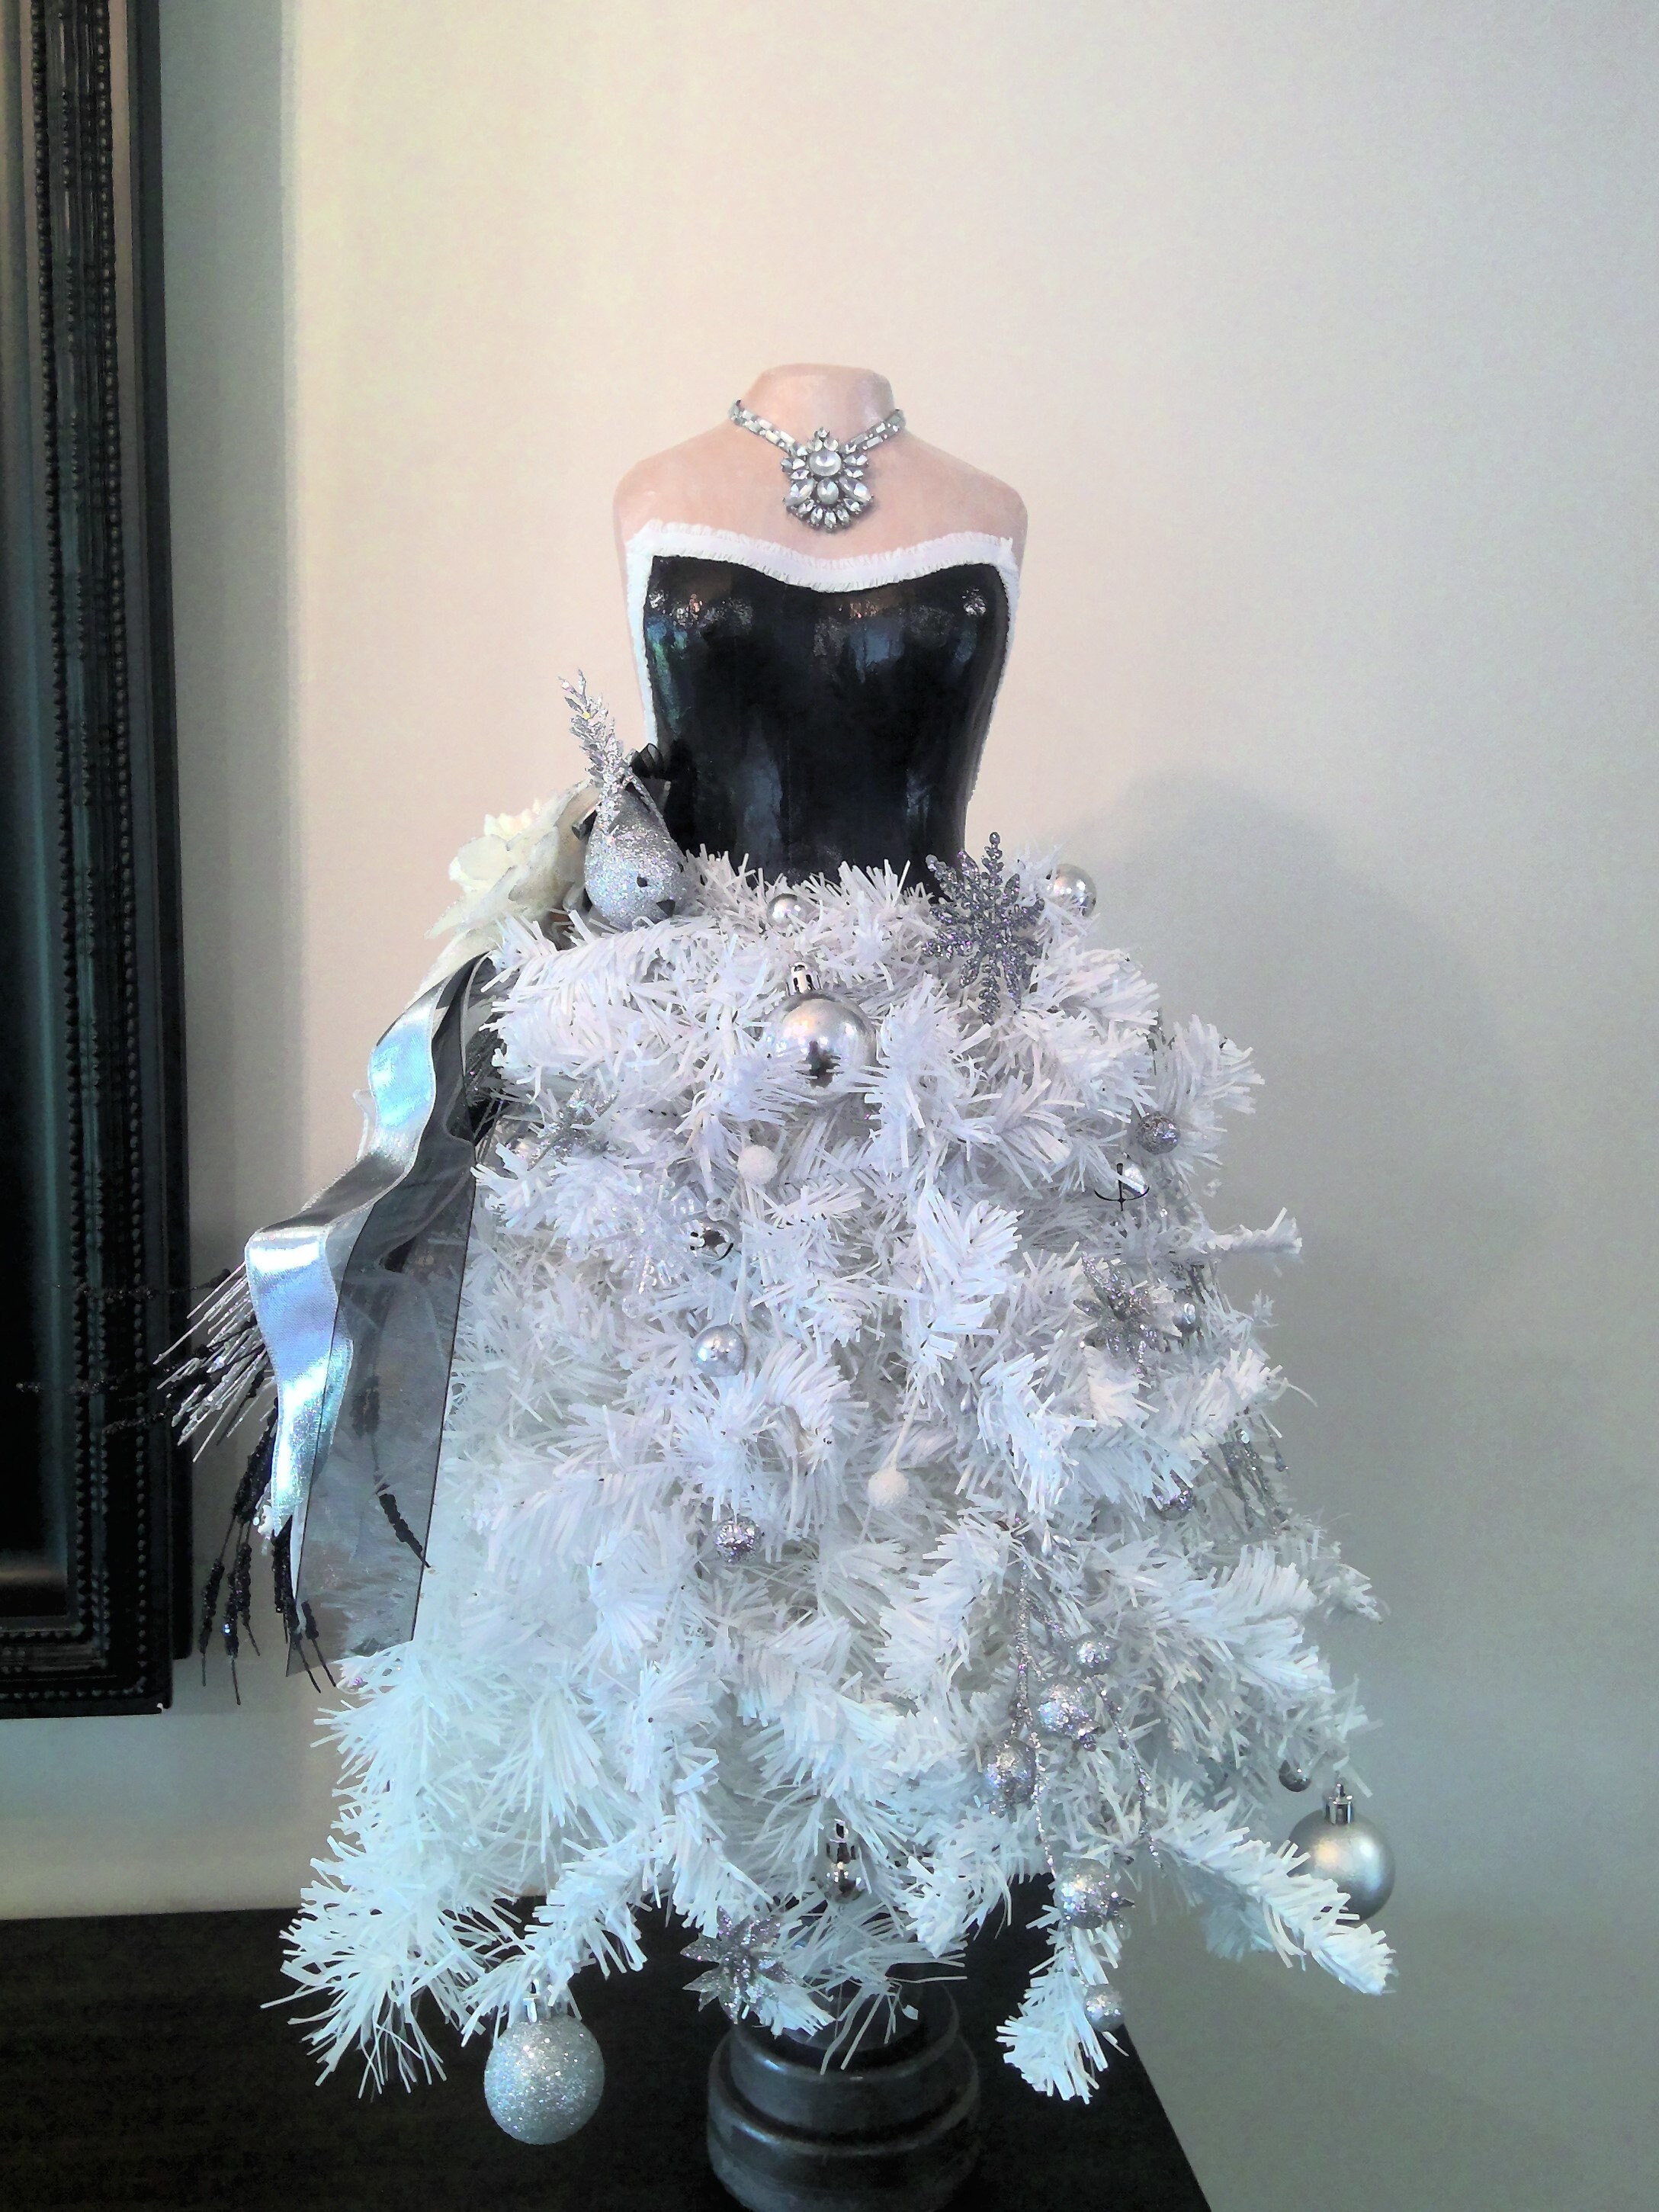 White Mannequin Tree Unique Christmas Tree Christmas Centerpiece Dress Form  Gold Christmas Décor Black and White Christmas Tree 